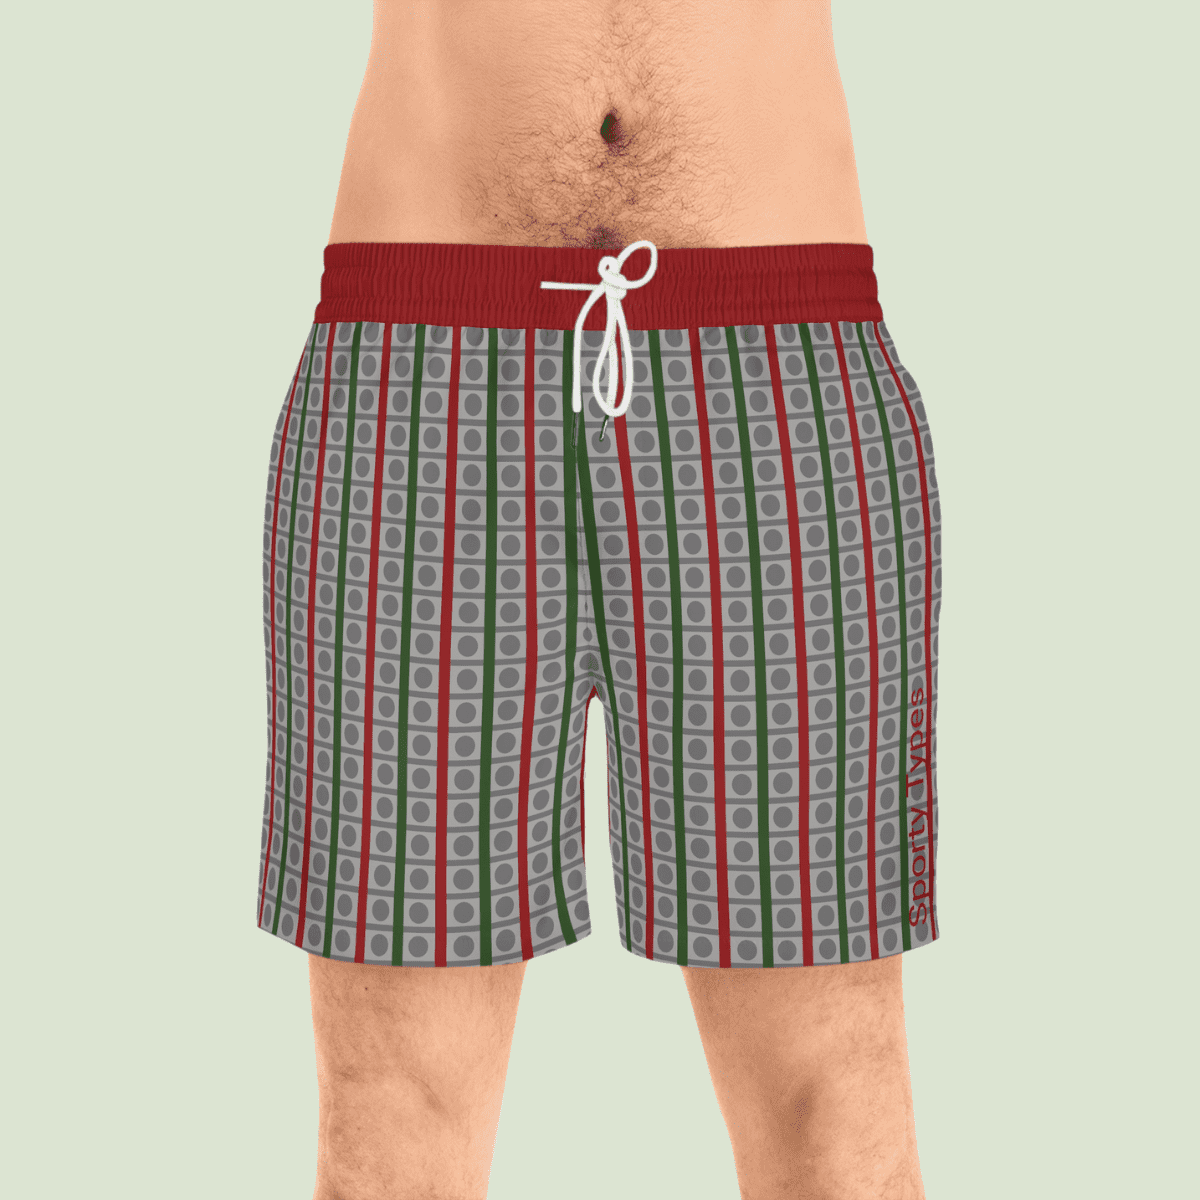 Men's Red and Green Striped Swim Shorts